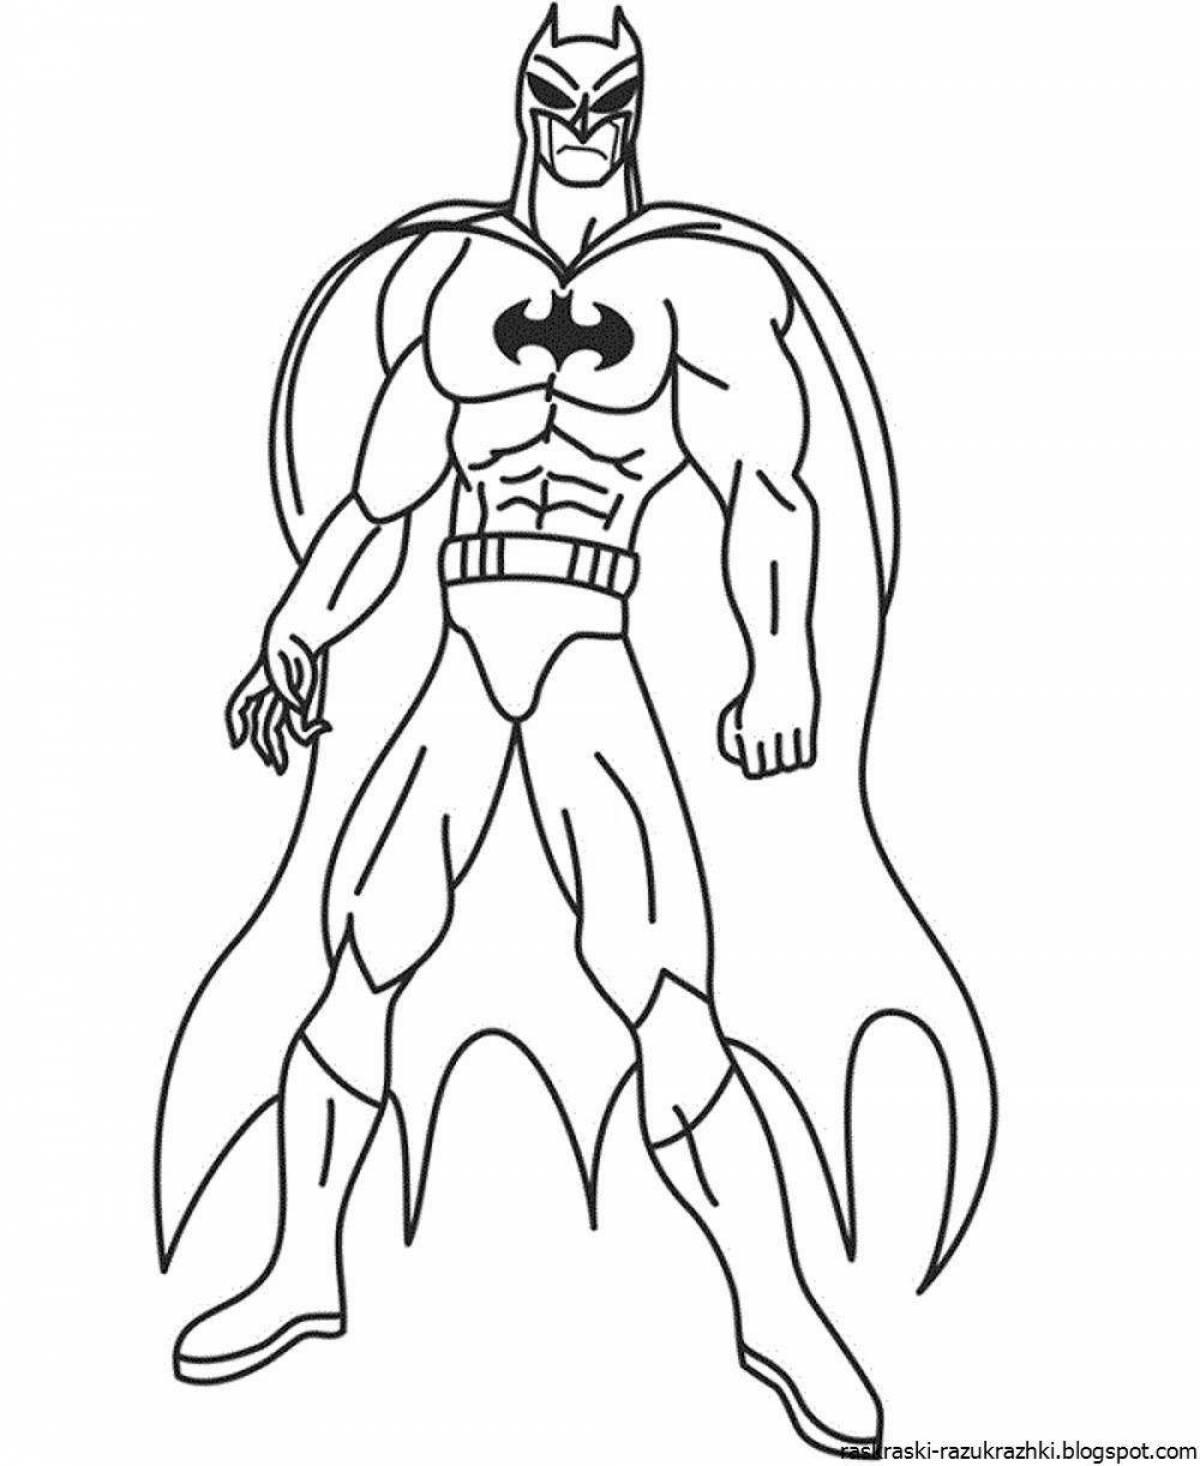 Coloring book funny superheroes for children 6-7 years old